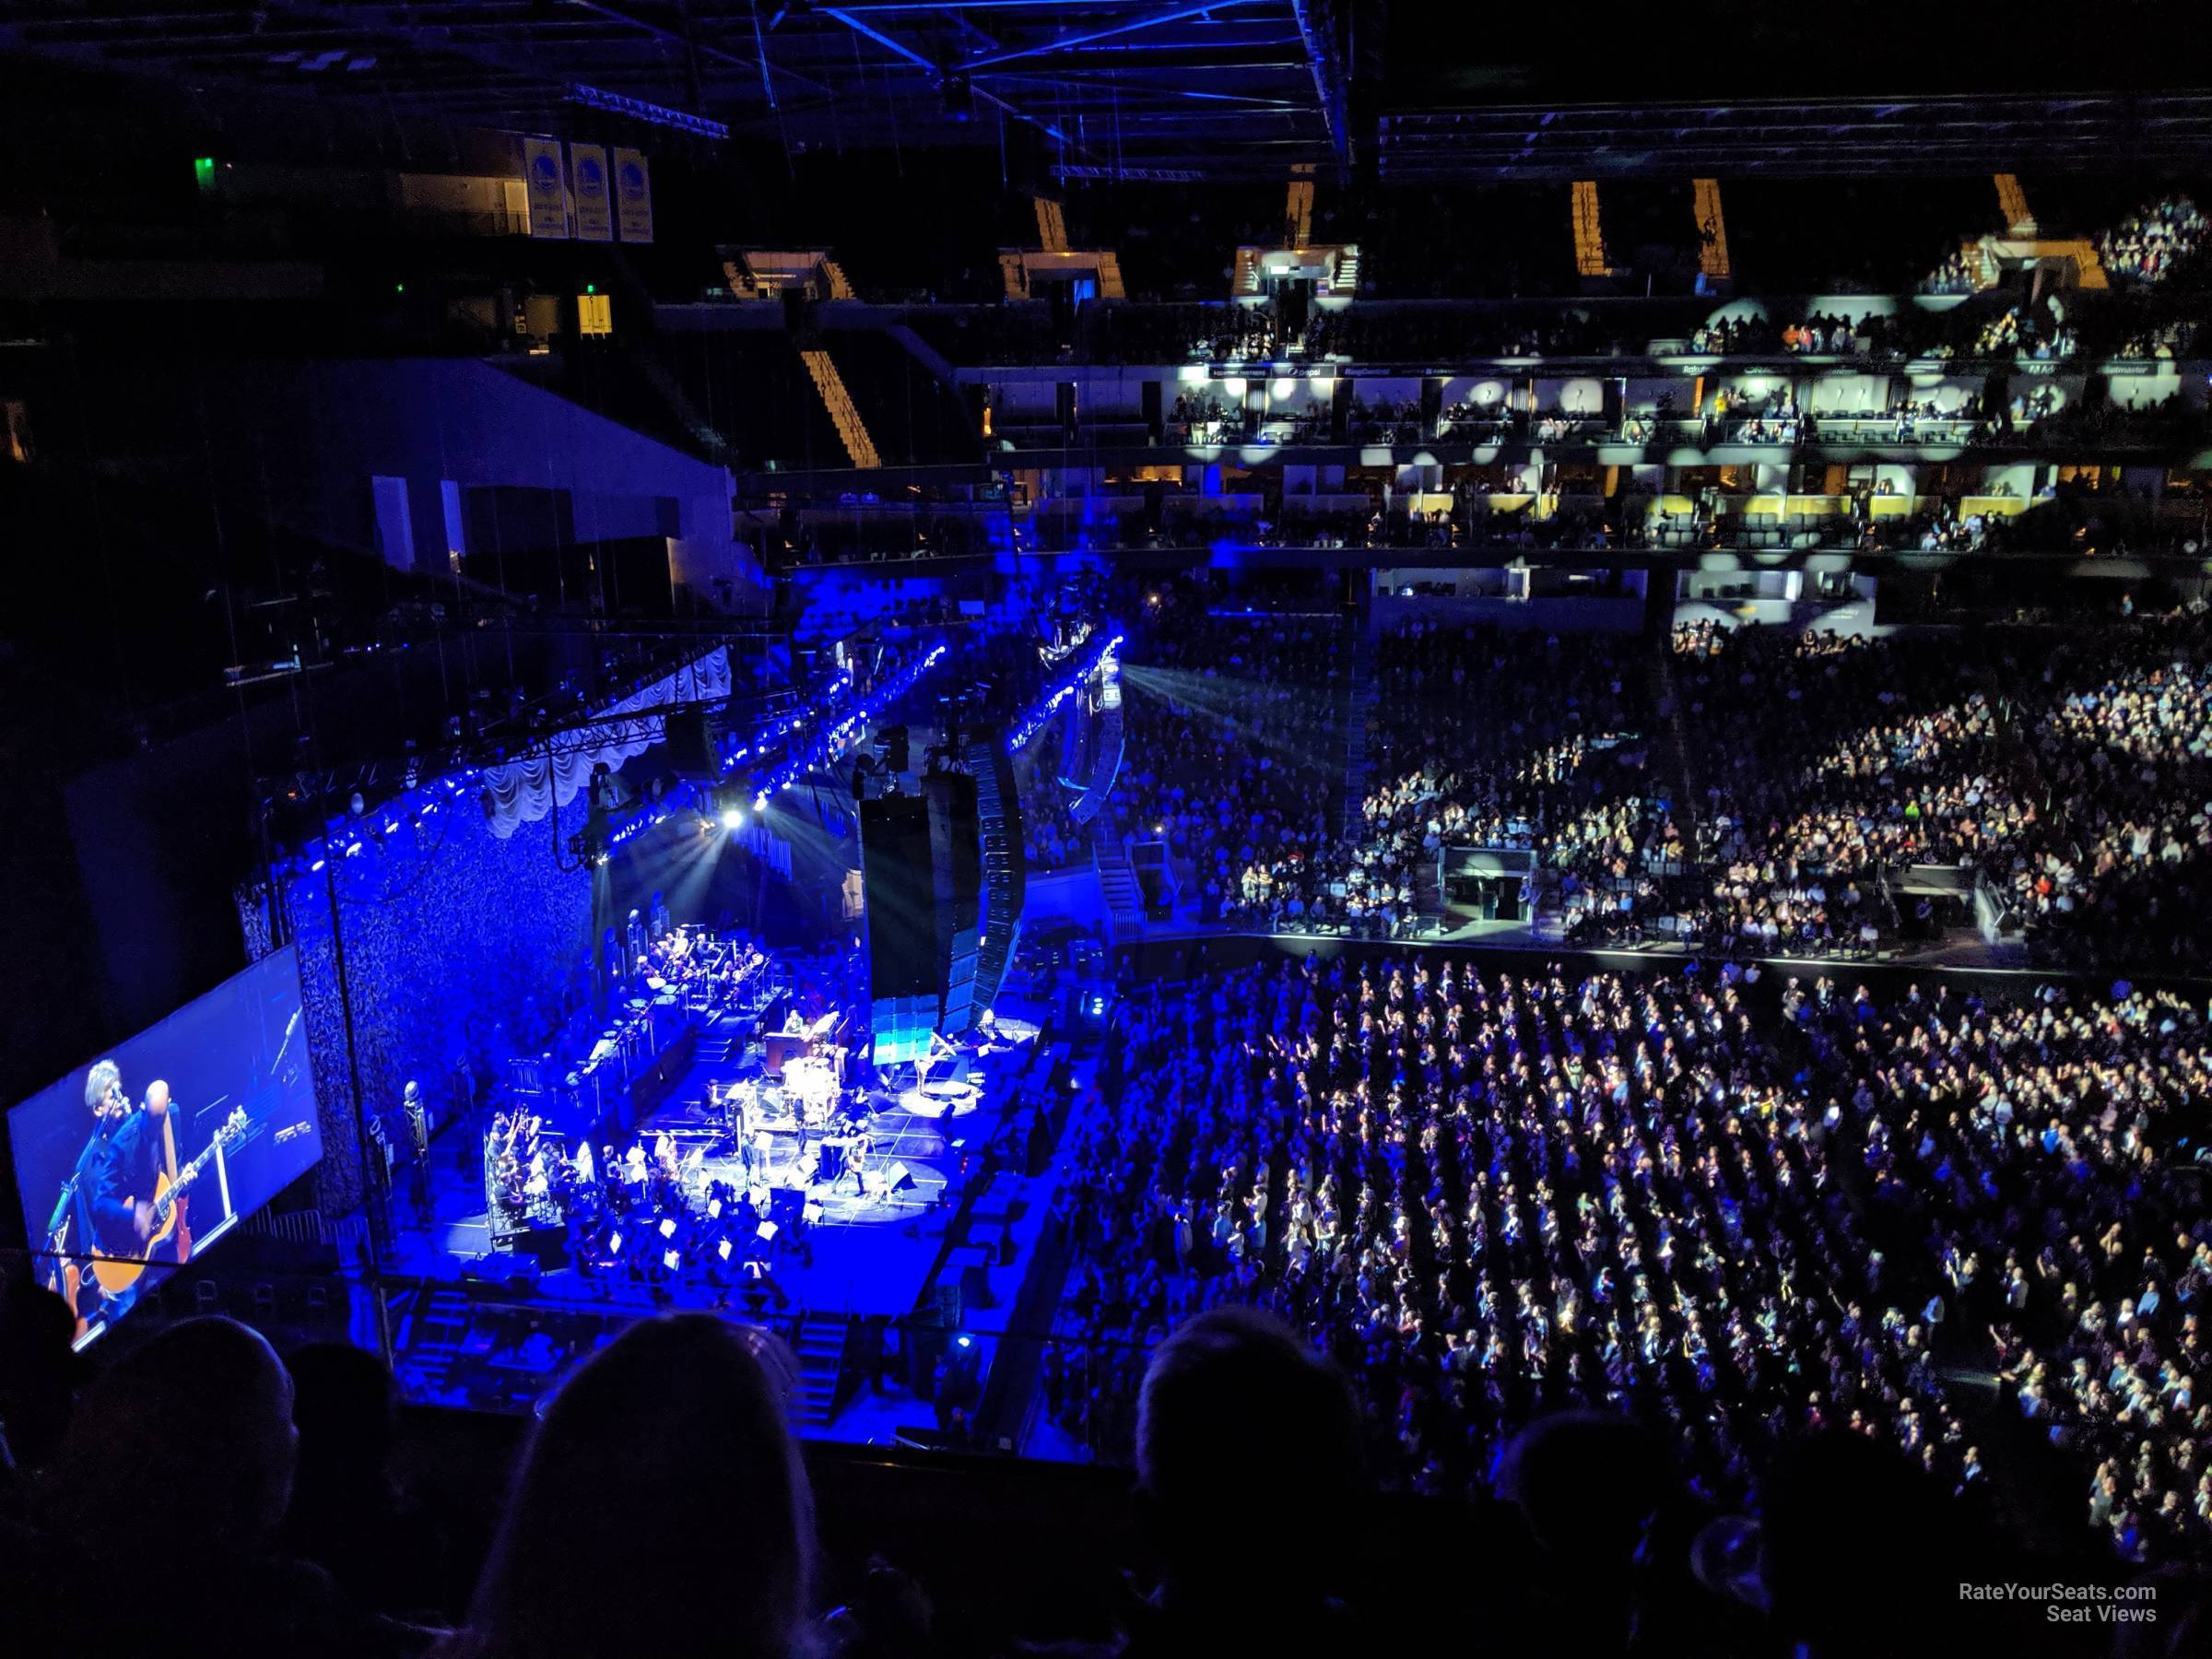 section 221, row 9 seat view  for concert - chase center